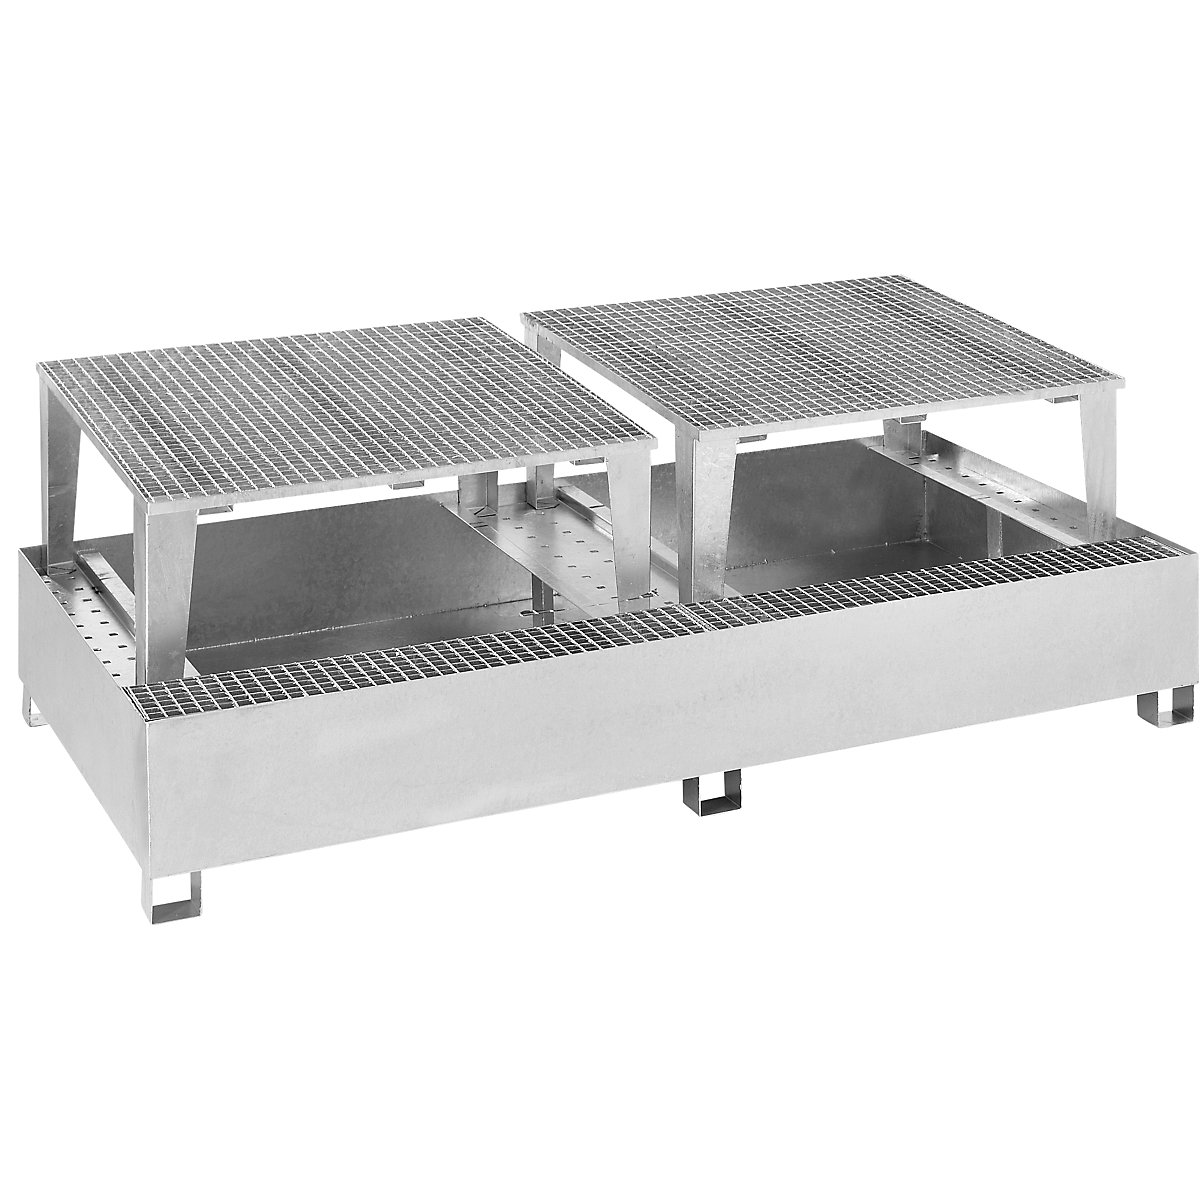 Steel sump tray for IBC/CTC tank containers – eurokraft basic, for 2 x 1000 l containers, 2 filling attachments, hot dip galvanised-3